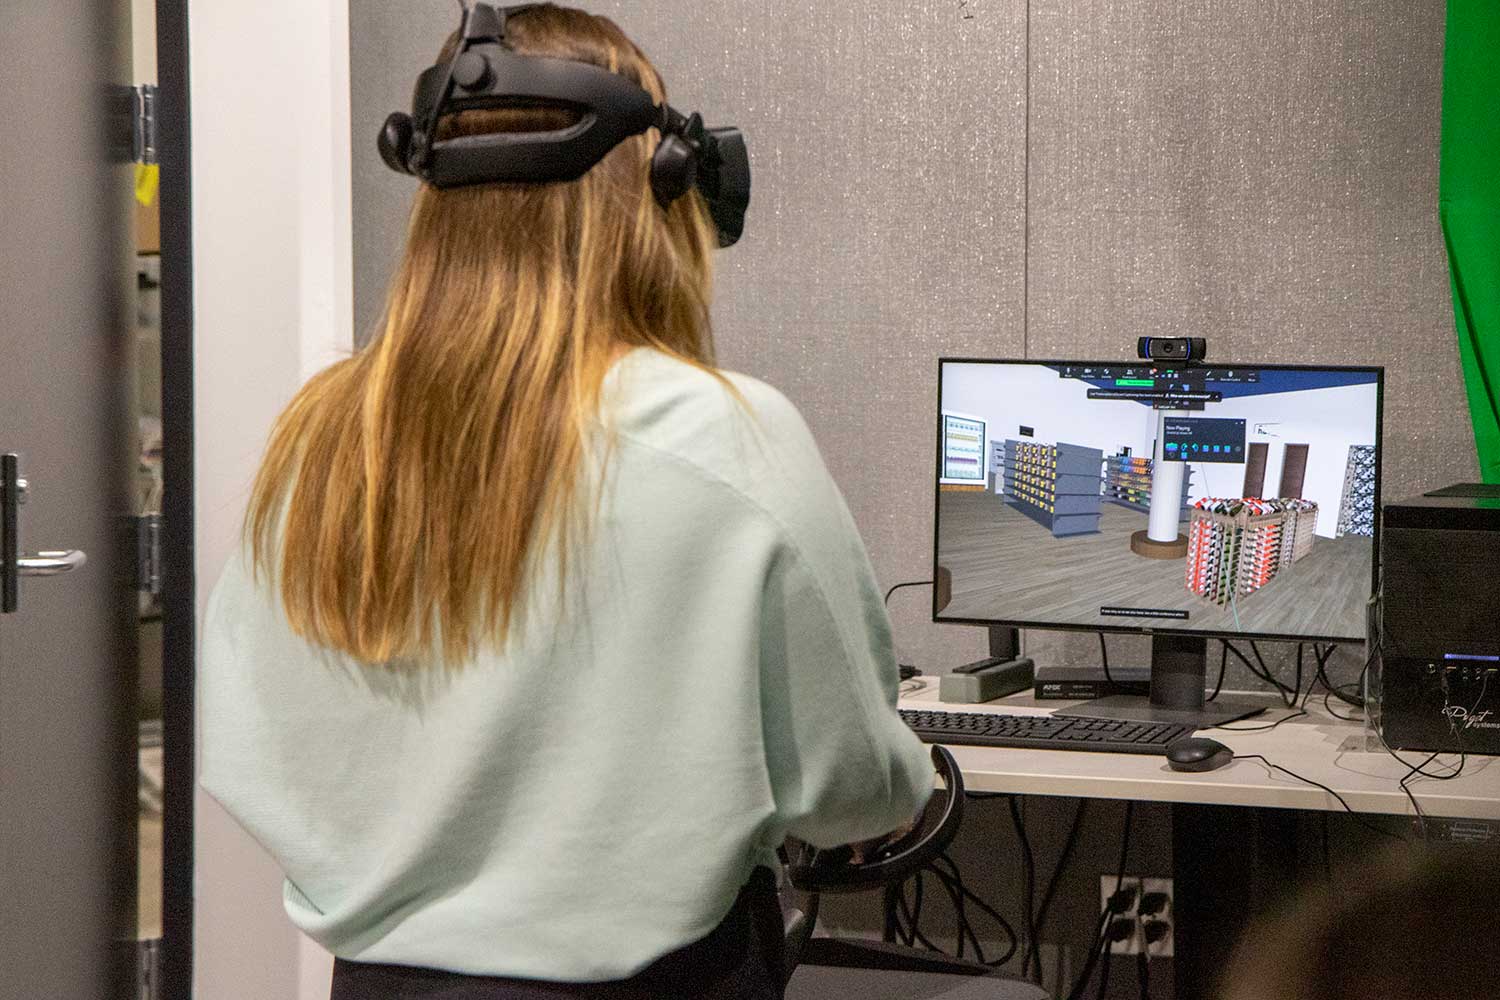 Student wearing VR headset in front of computer, which displays a simulated retail space